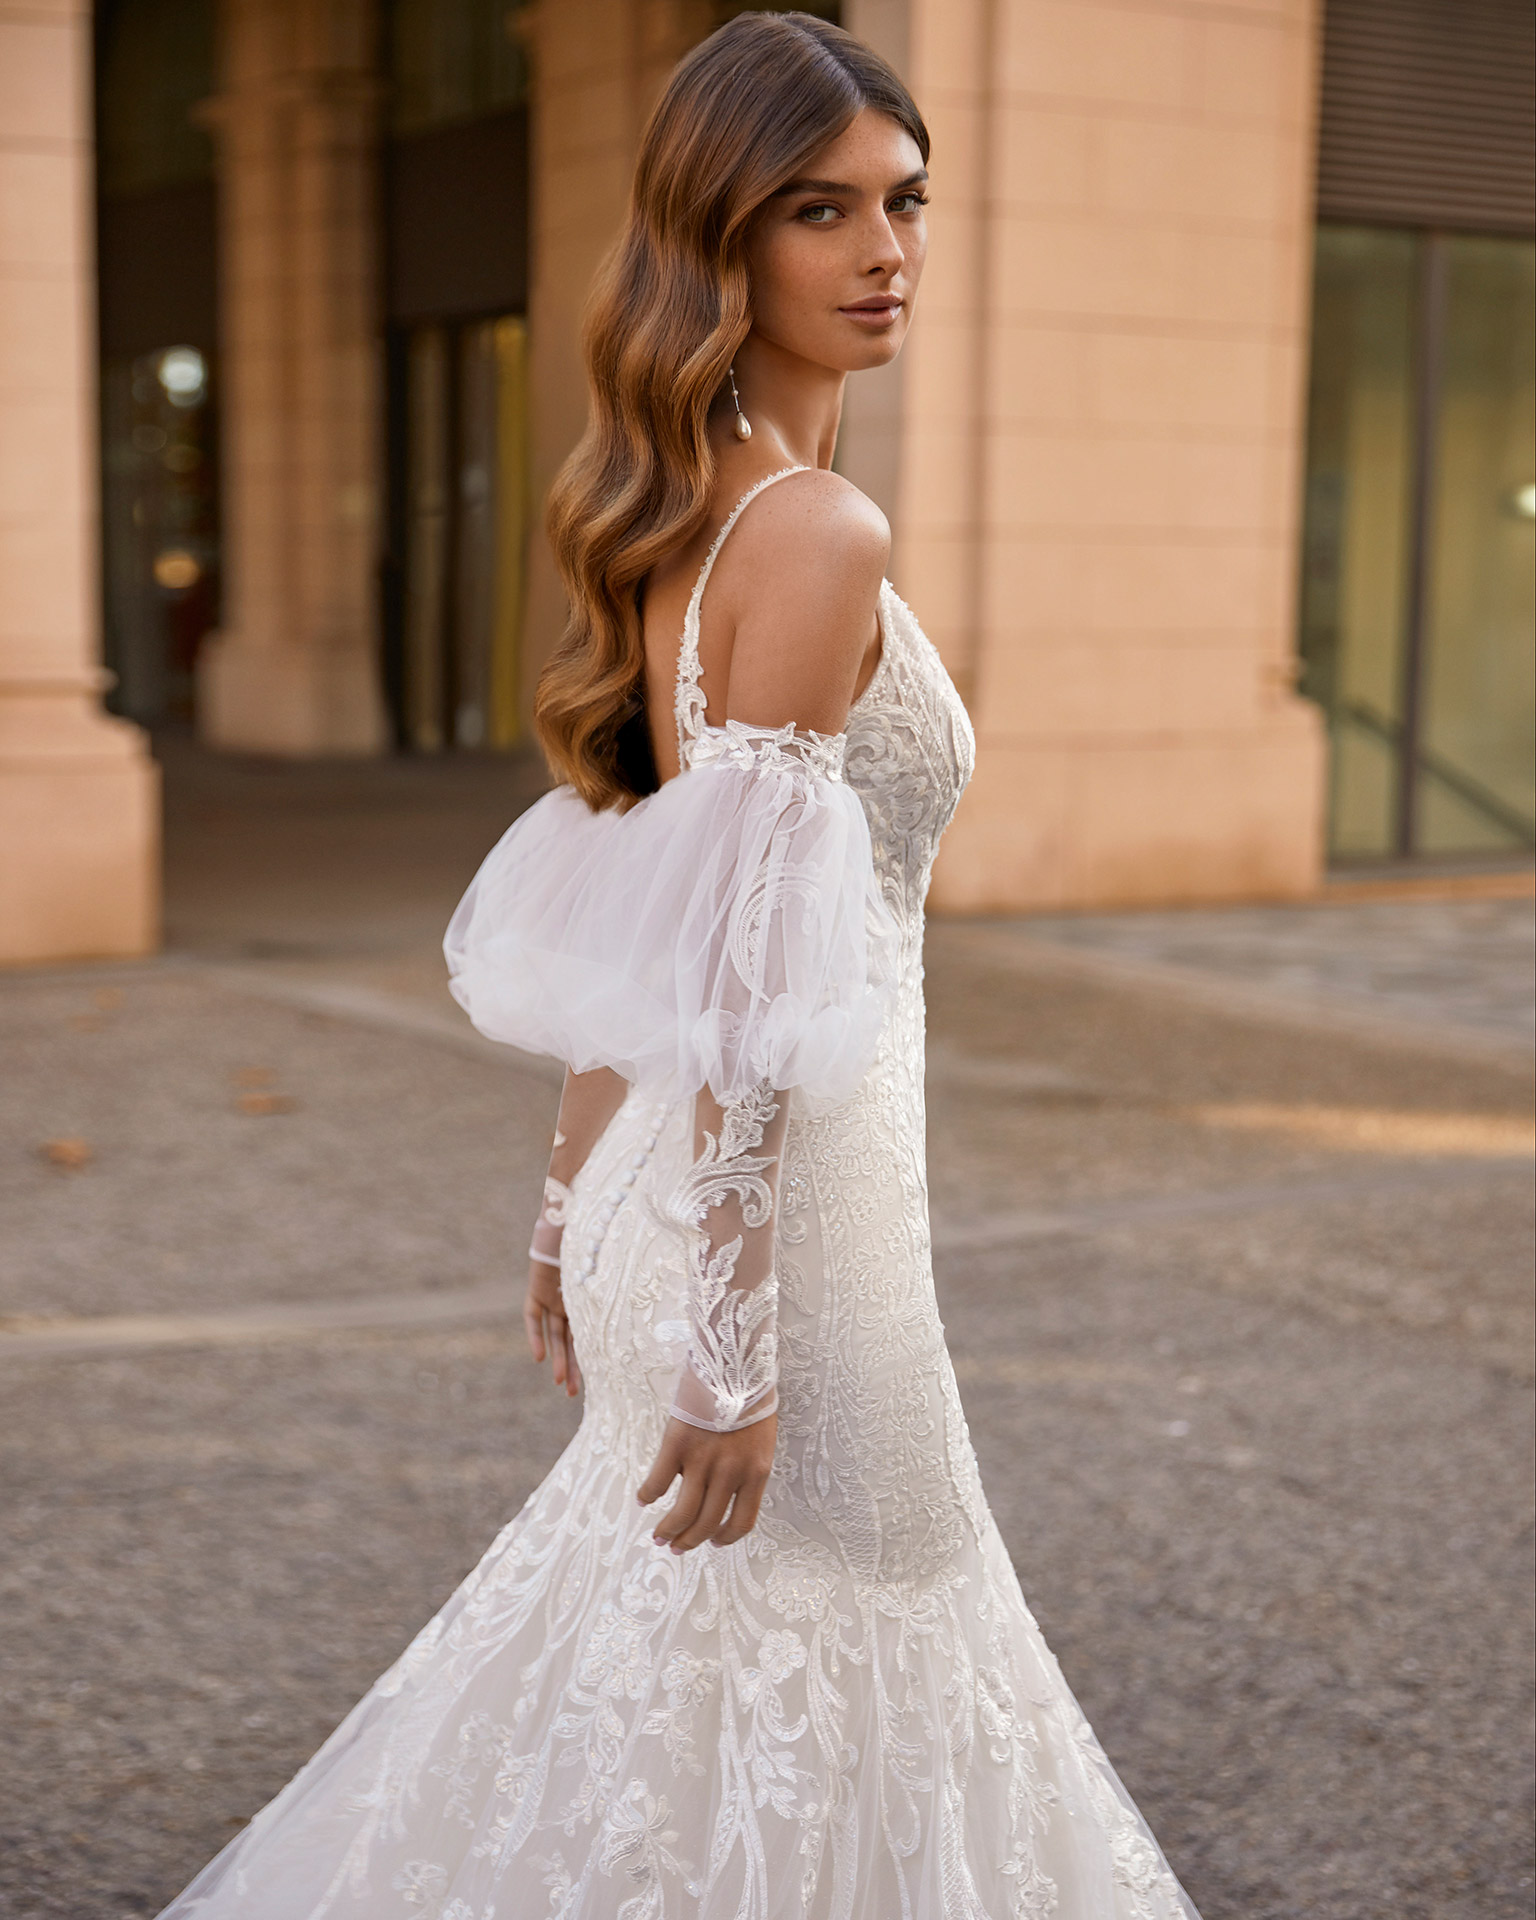 Romantic mermaid-style wedding dress, made of lace, tulle and shiny mesh, including puffed sleeves; with a V-neckline, an open back with sheer inserts, and long tulle and appliqué sleeves. Dreamy Luna Novias outfit made of lace with beadwork. LUNA_NOVIAS.